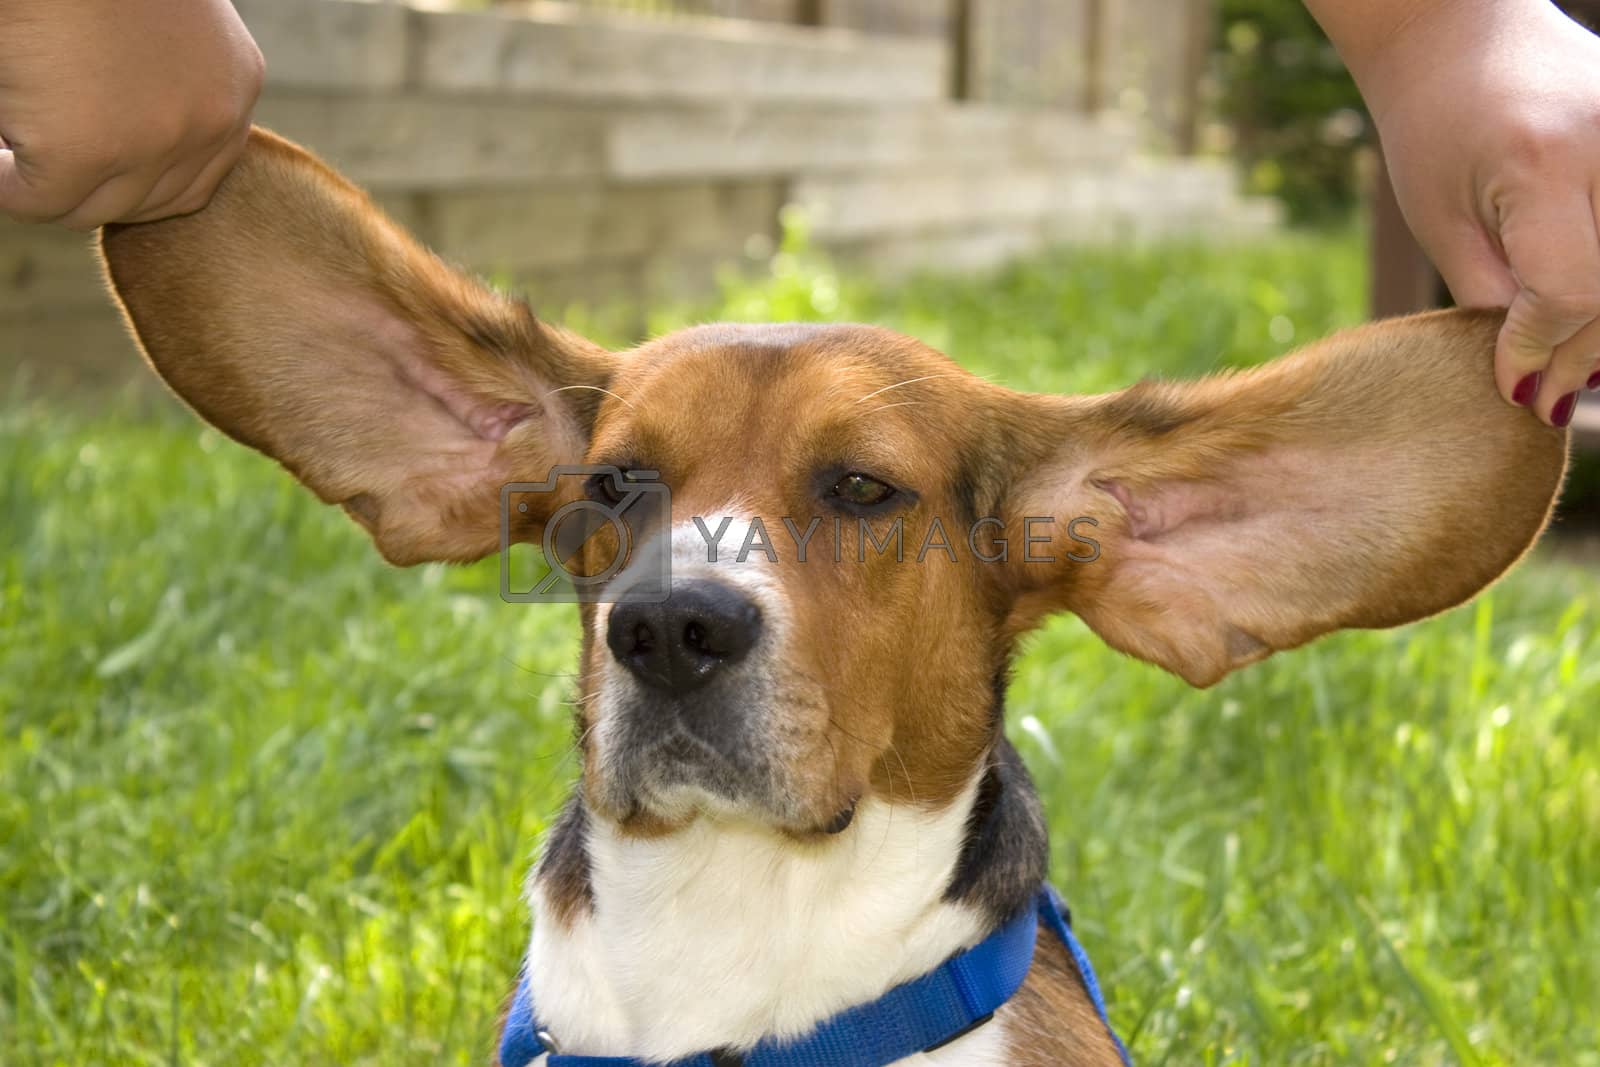 Royalty free image of Big Ear Beagle by graficallyminded